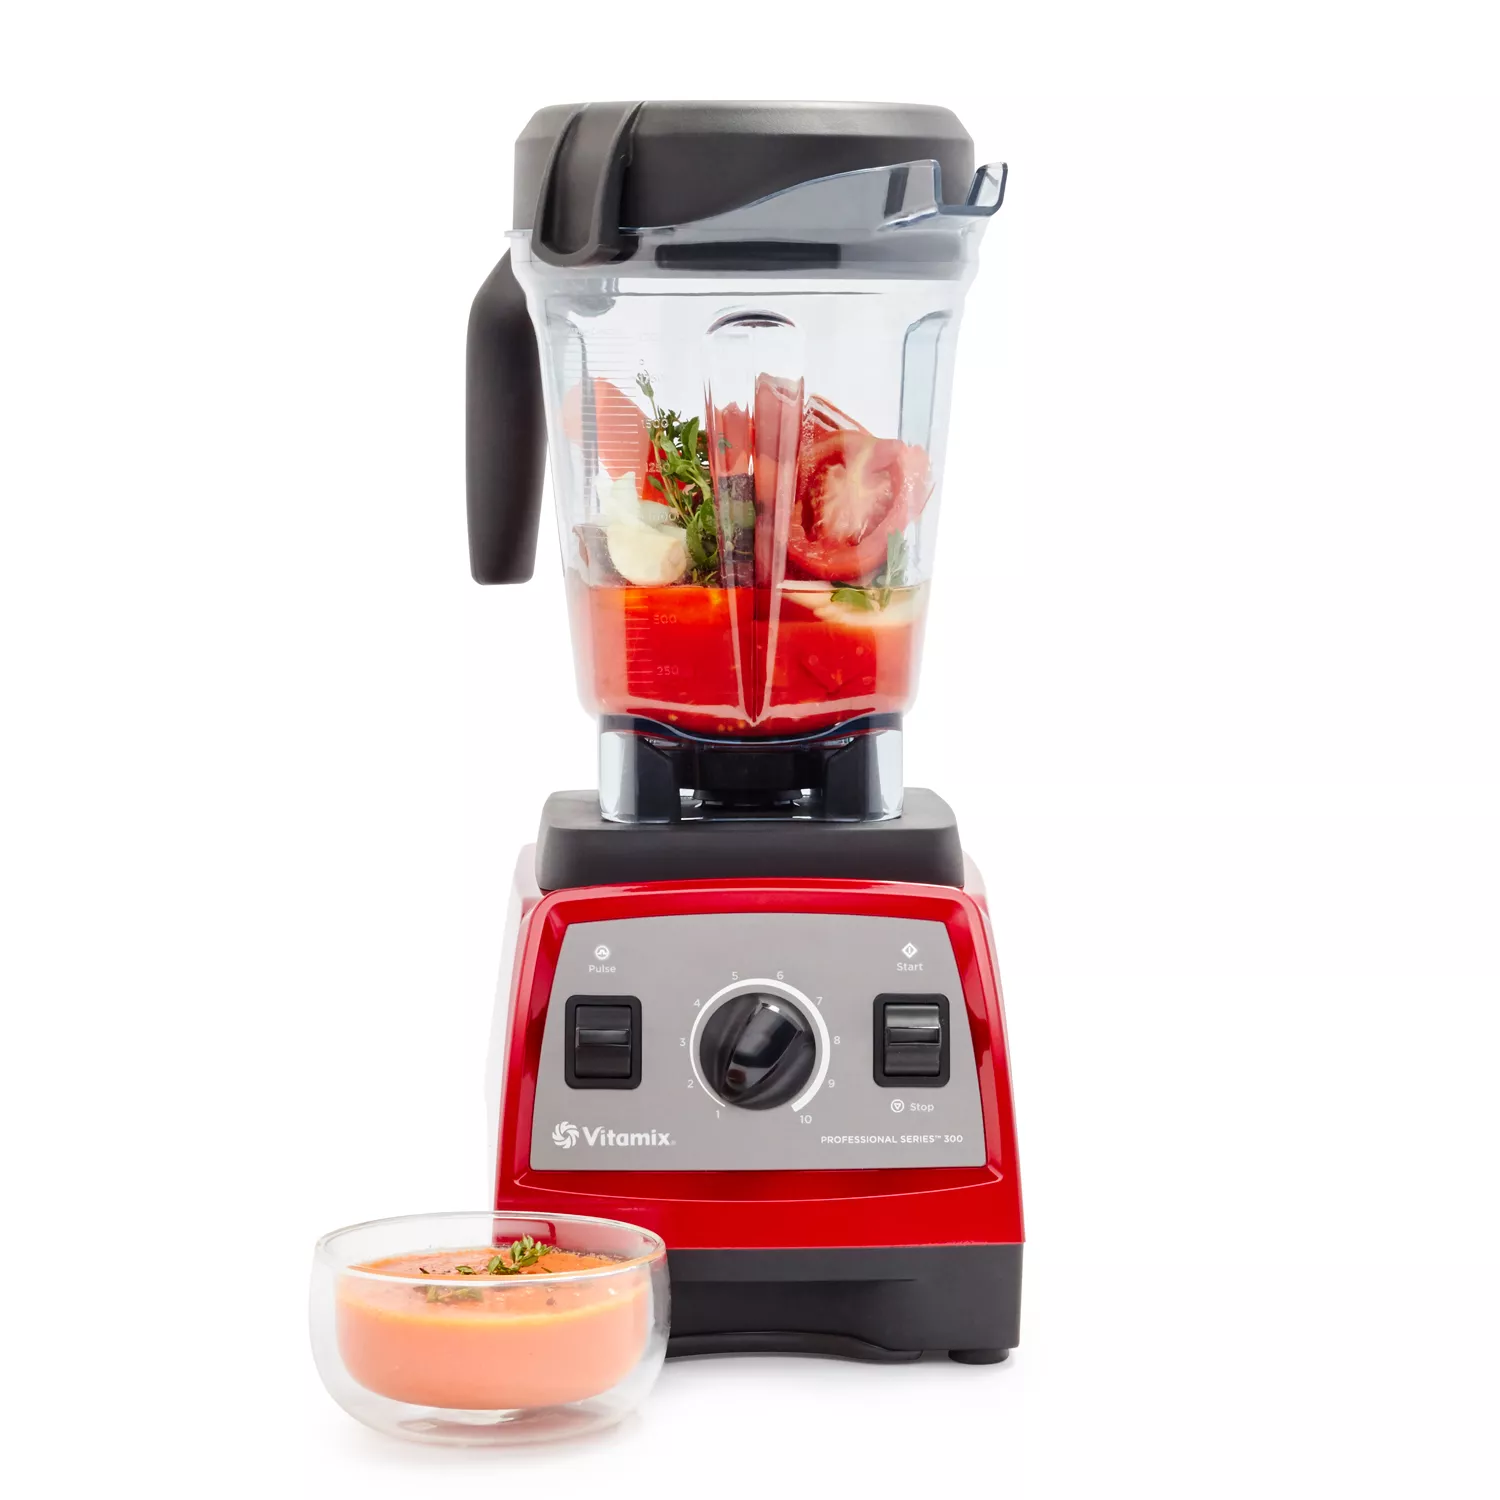 Vitamix Professional-Grade Blenders Are Nearly 50% and 40% Off on